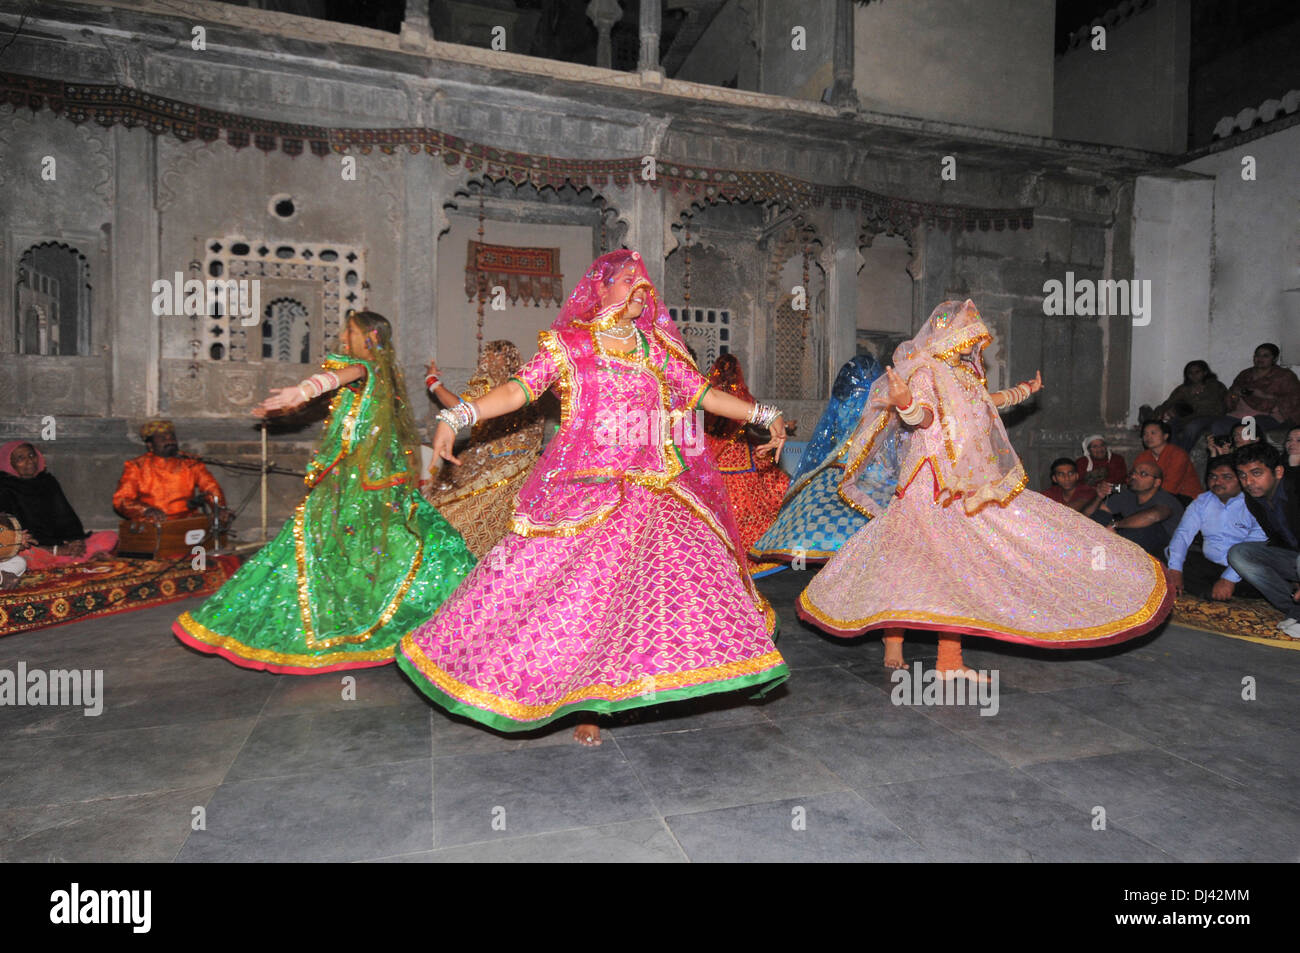 Ghoomar folk dance. Performed by women in swirling robes. Rajasthan India  Stock Photo - Alamy